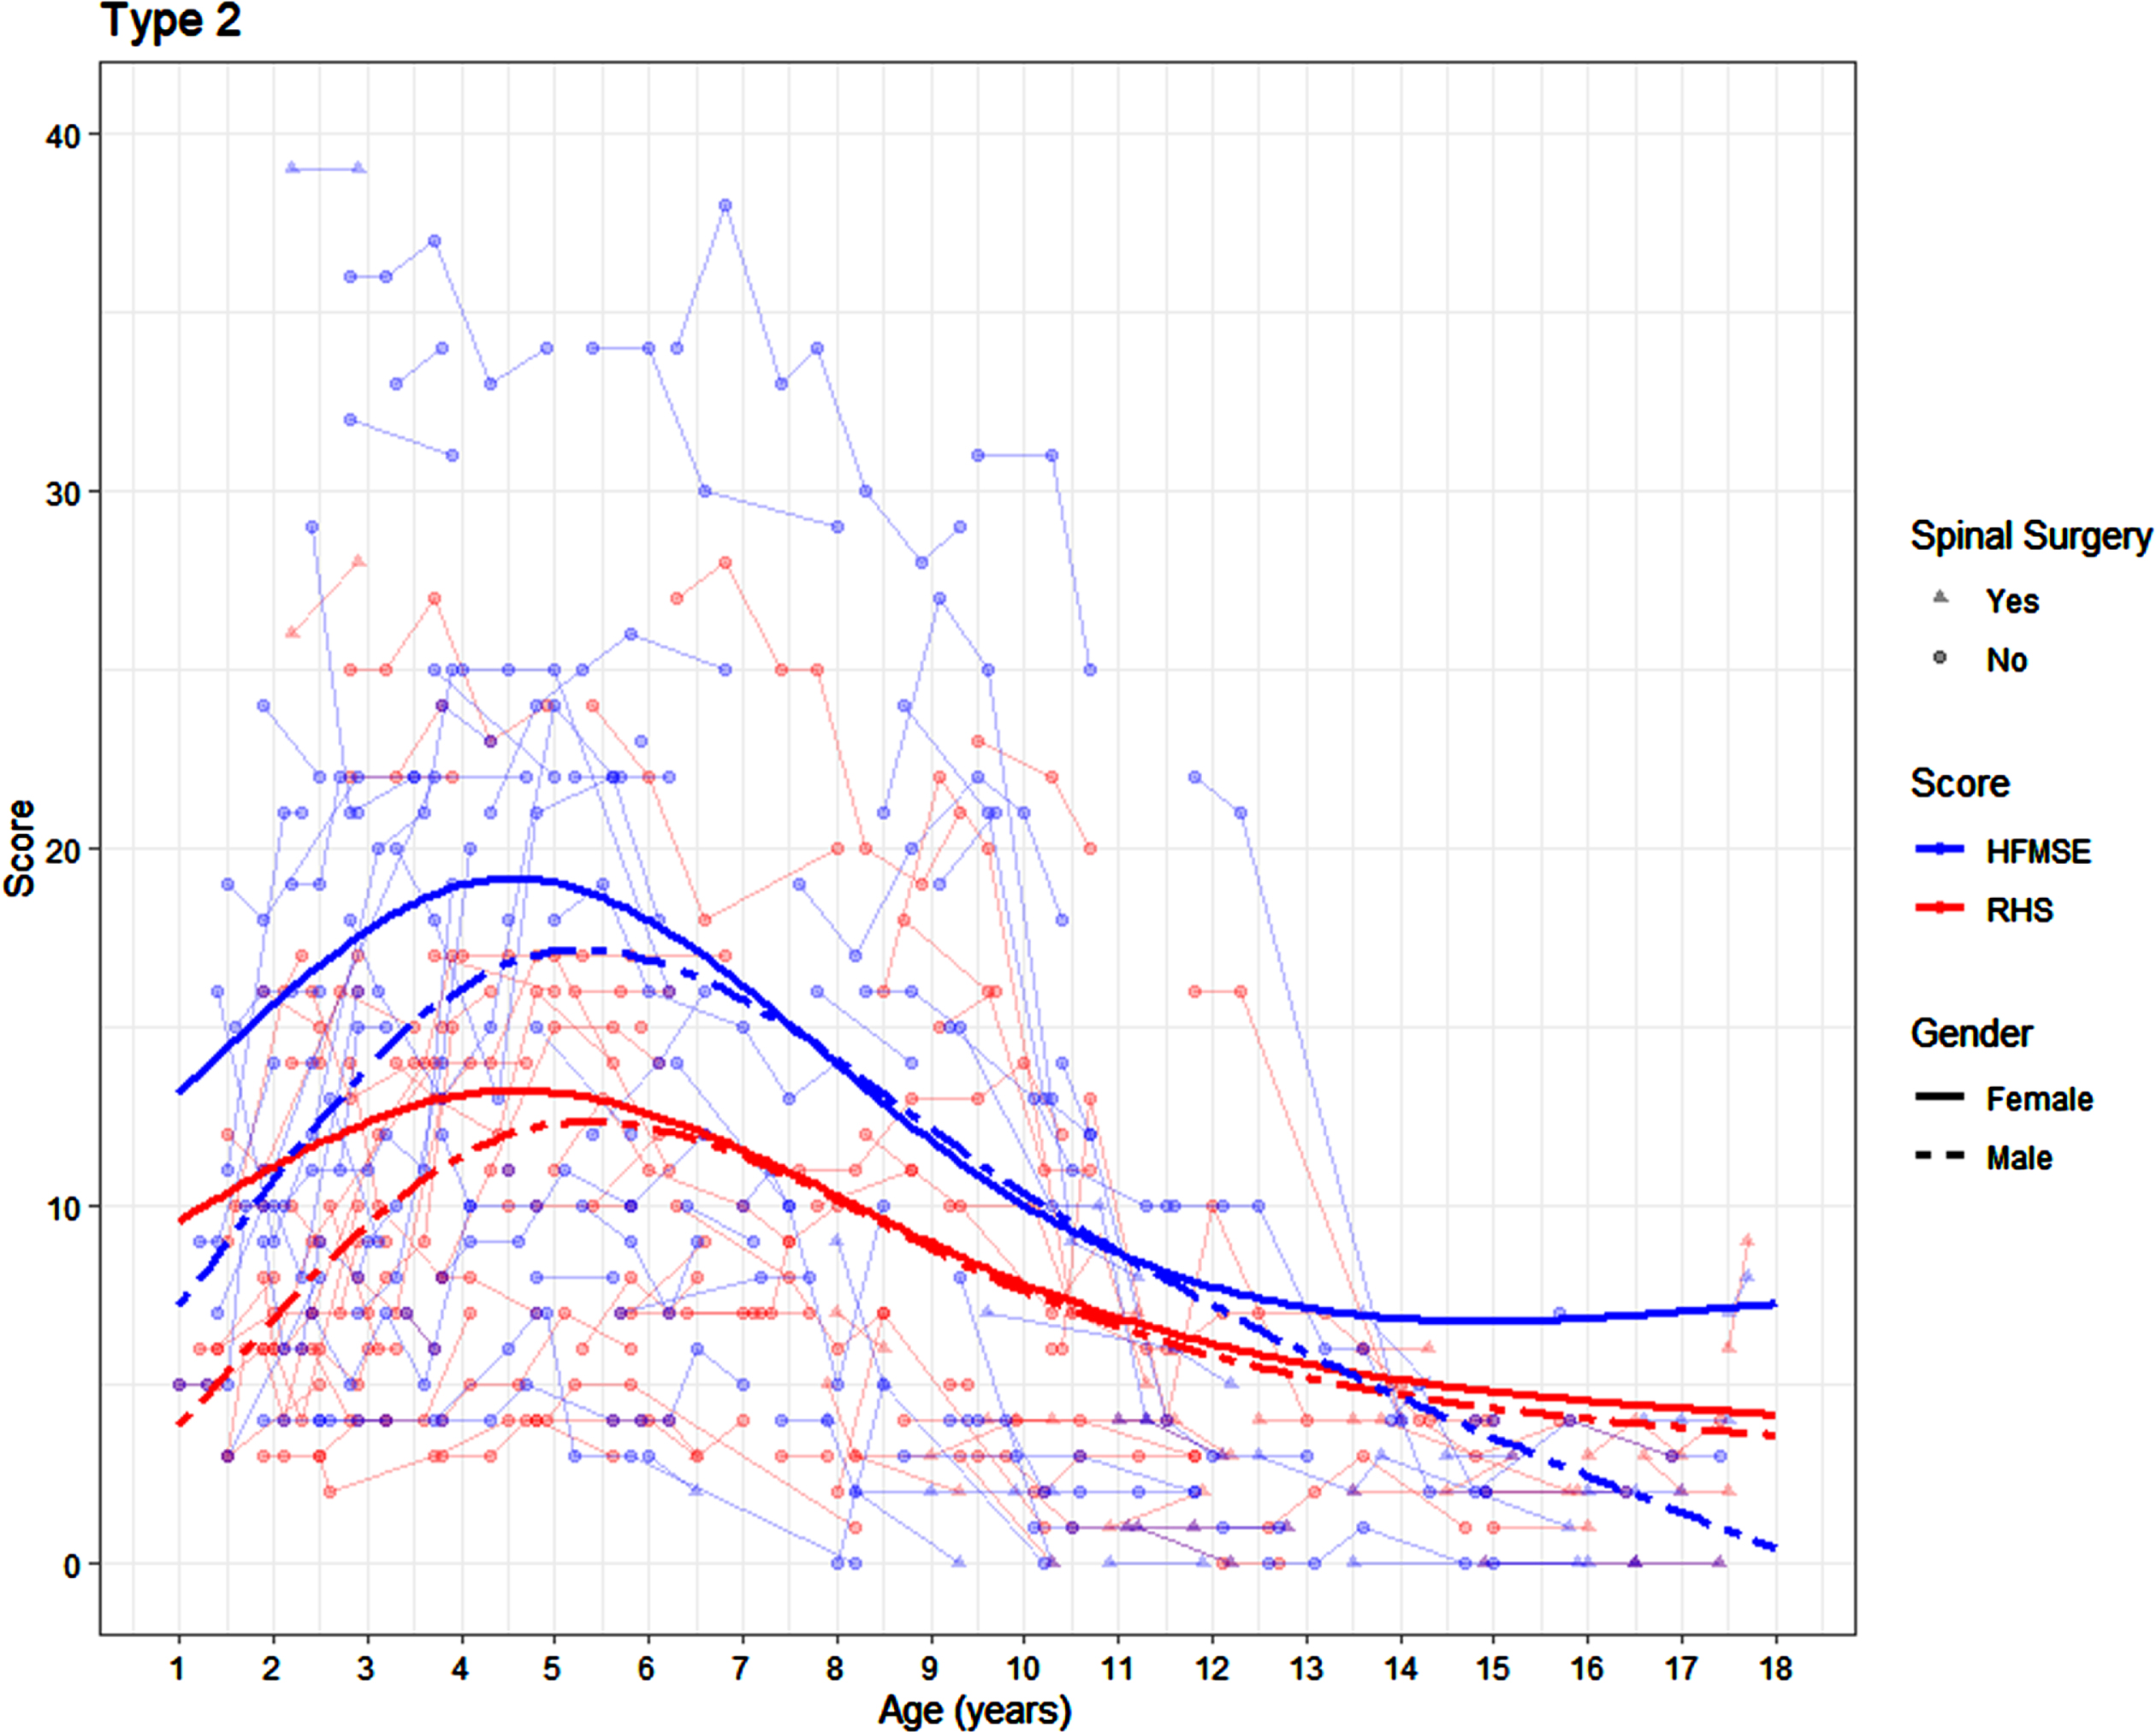 Average SMA 2 trajectories on the RHS and HFMSE by age and sex (average presented for participants who have not undergone scoliosis surgery) surgery).